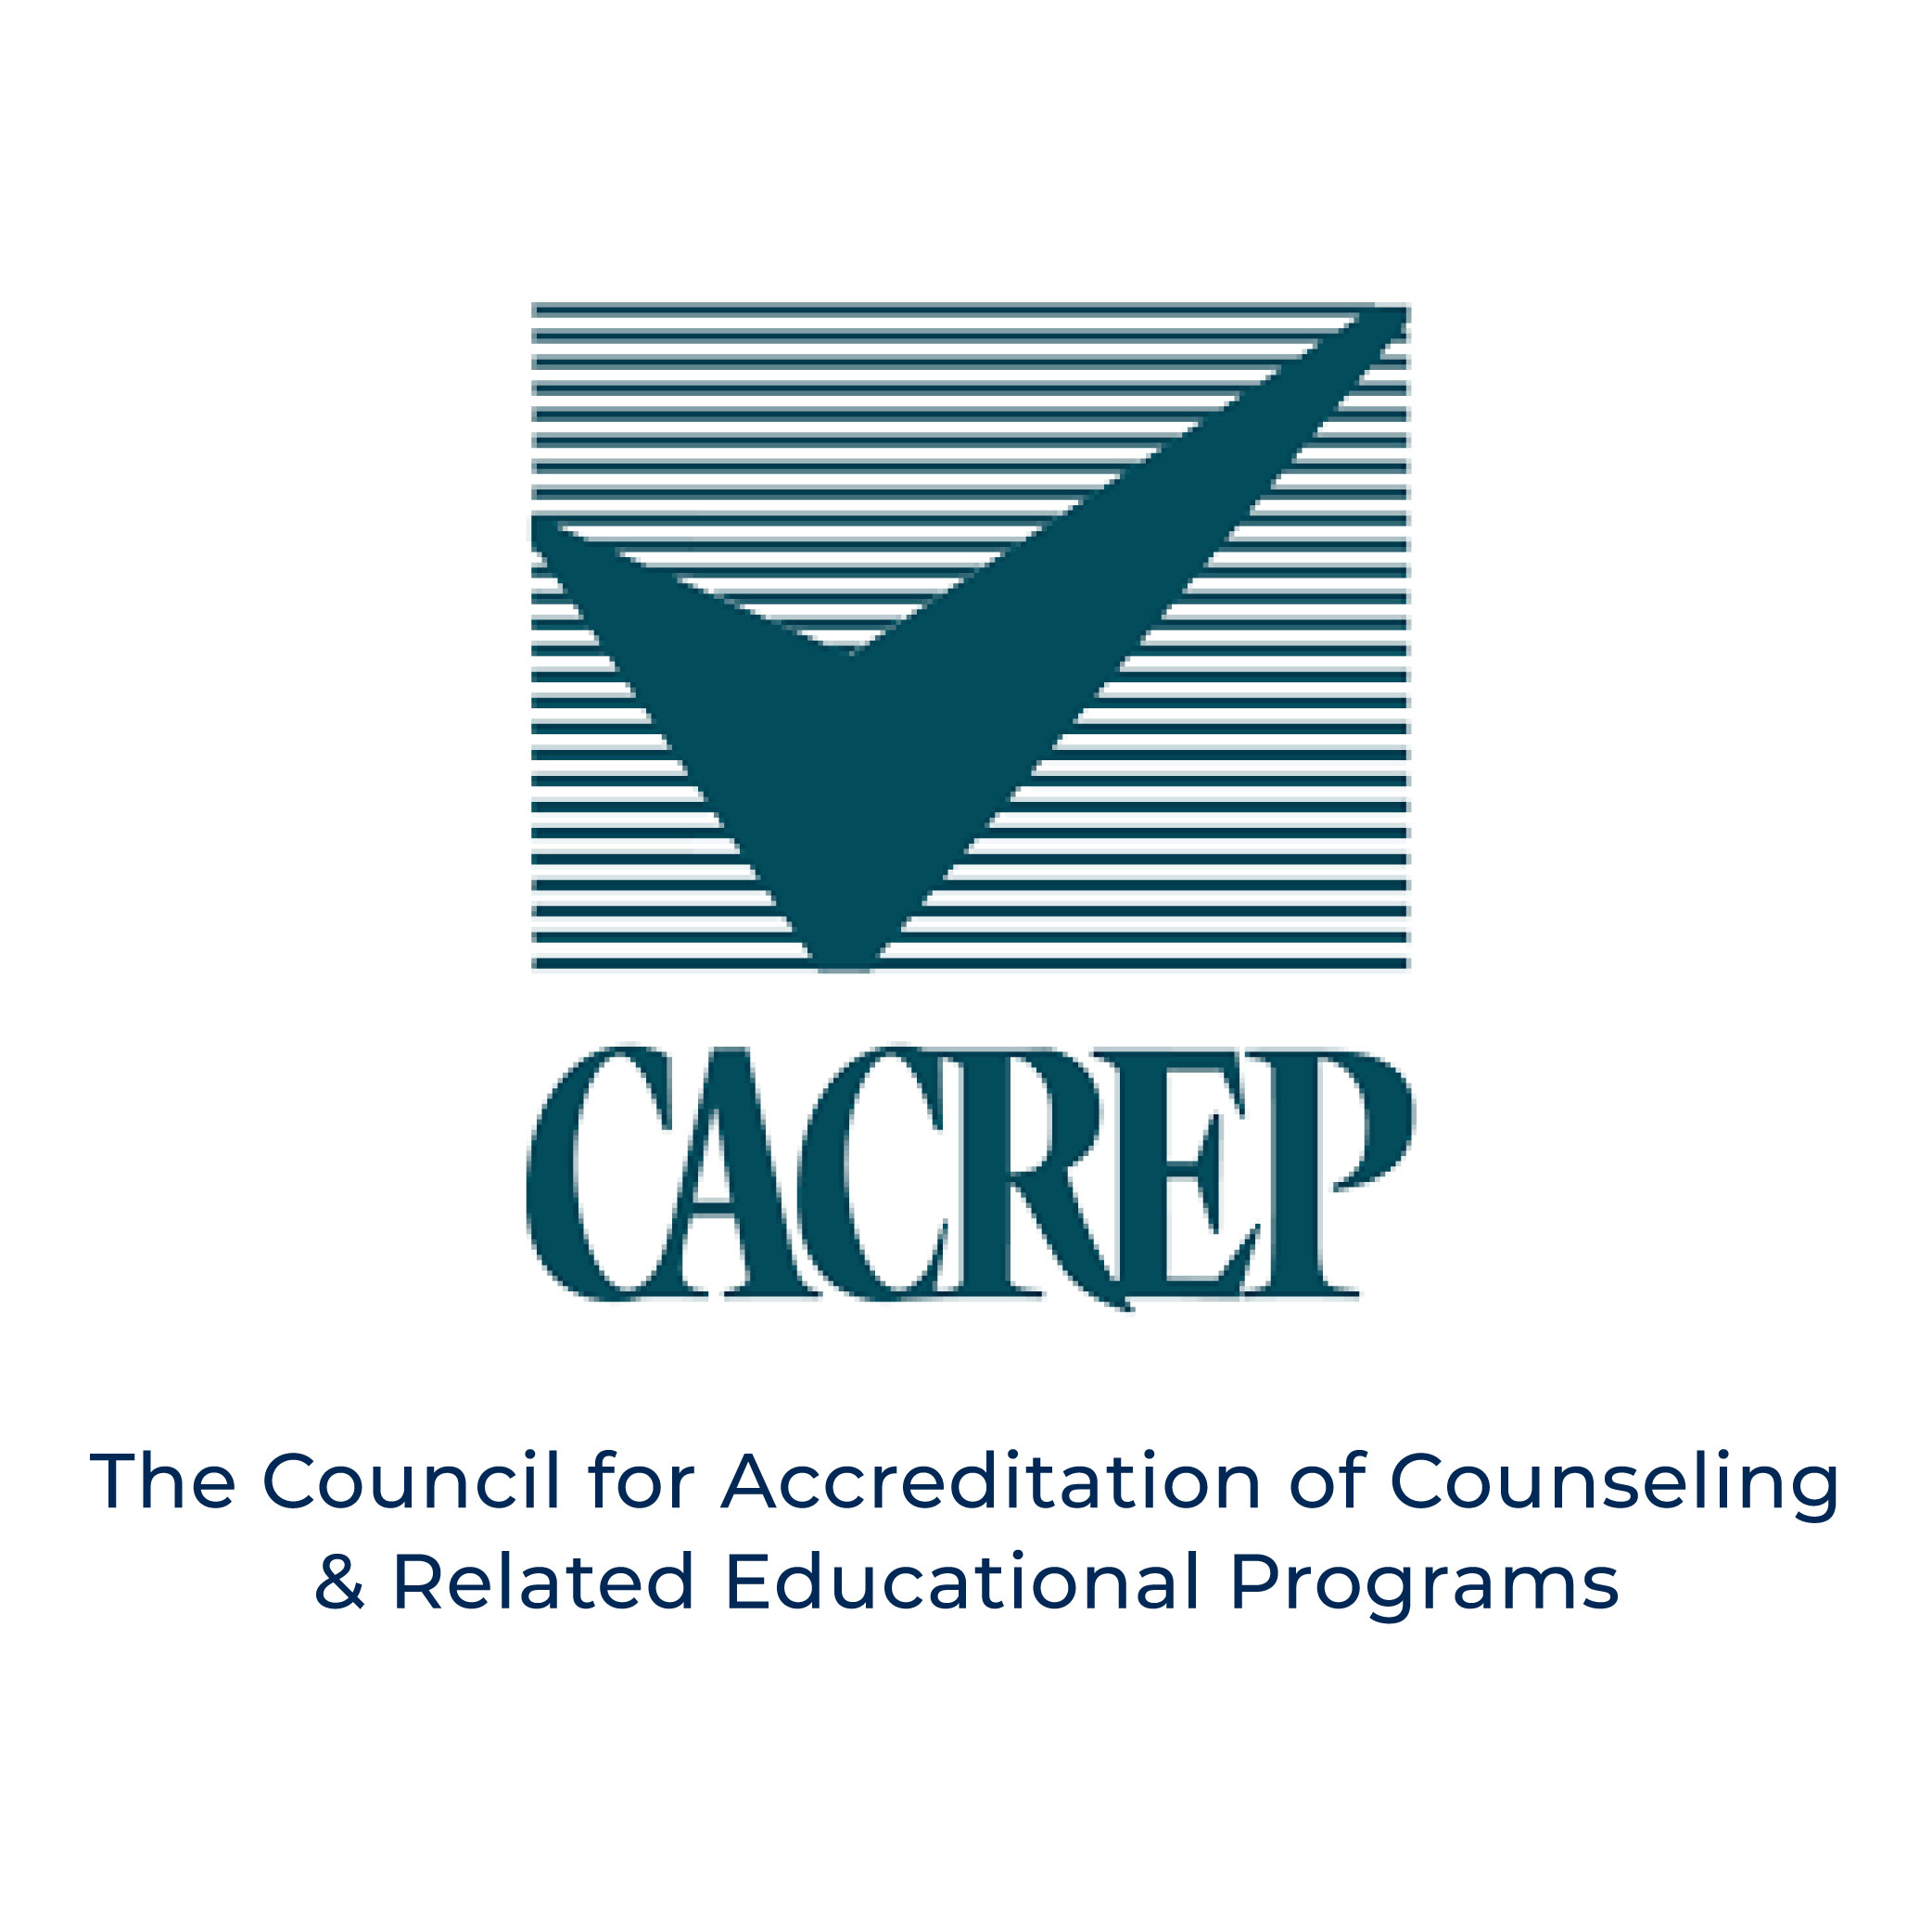 The Council for Accreditation of Counseling & Related Educational Programs